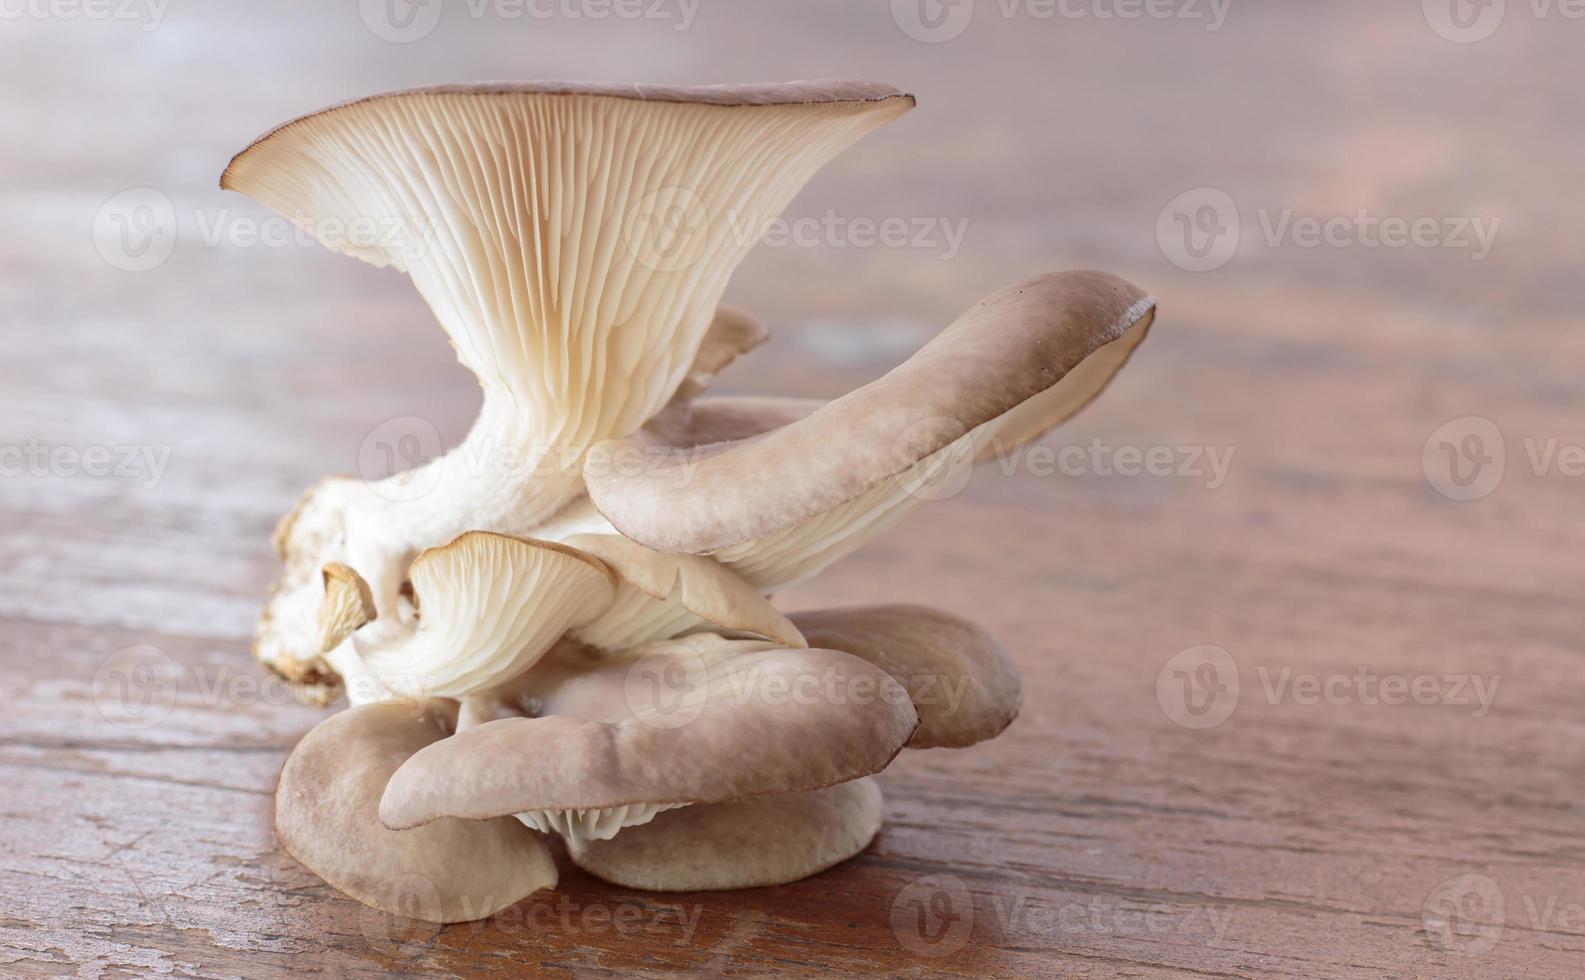 Oyster Mushroom, a sparse edible fungus with a grayish-brown oyster-shaped cap and a very short or missing stem. It grows on the wood of broadleaf trees and rots. photo